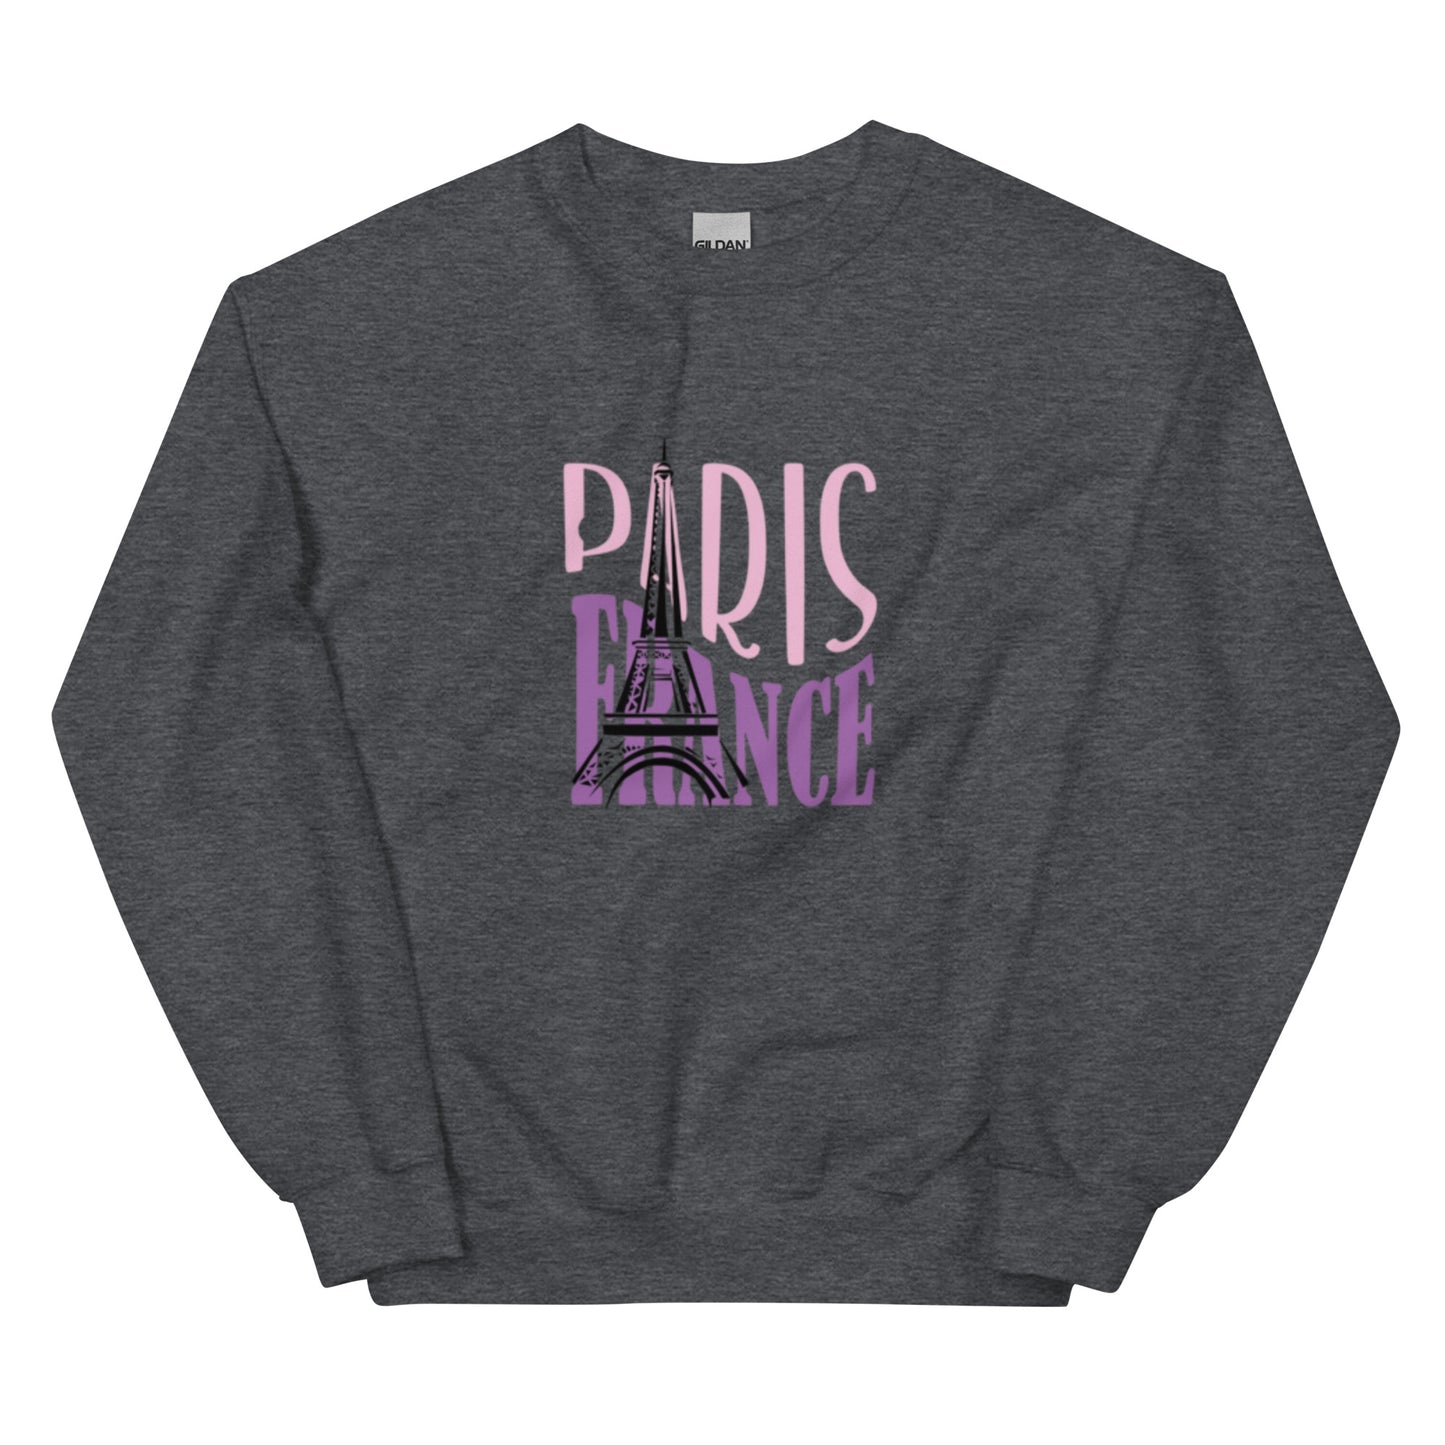 Unisex Sweatshirt Paris France / Eiffel Tower / Perfect Gift for yourself /